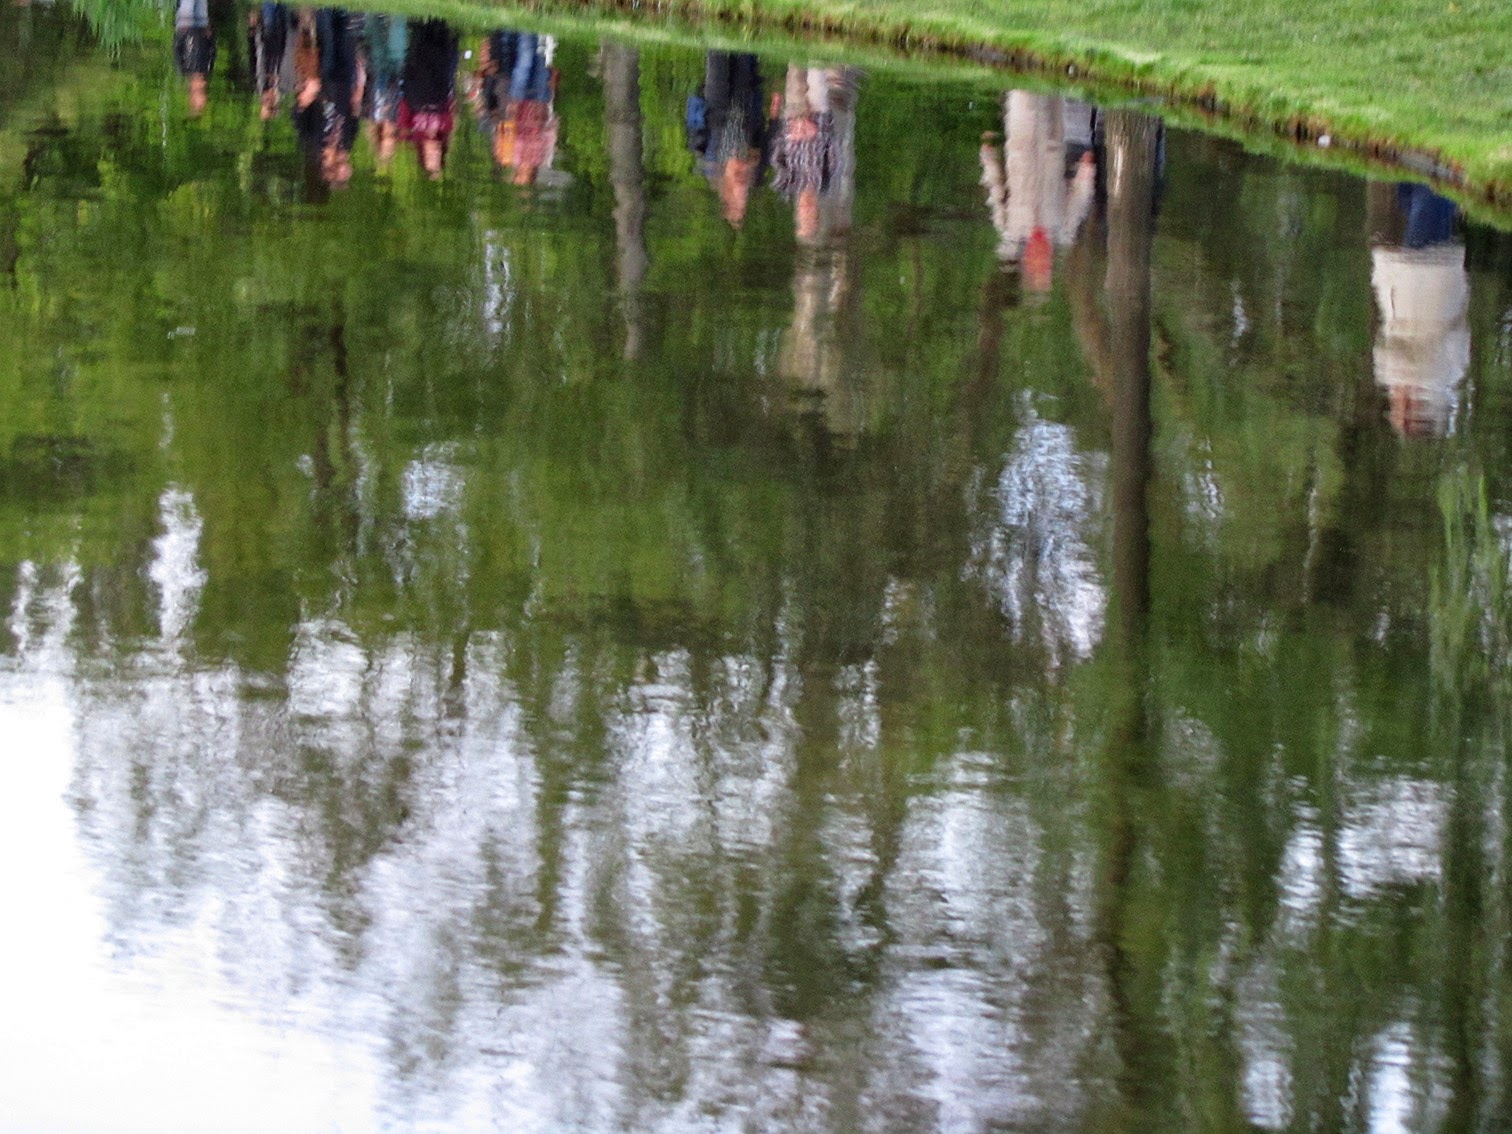 reflection of people in a pond